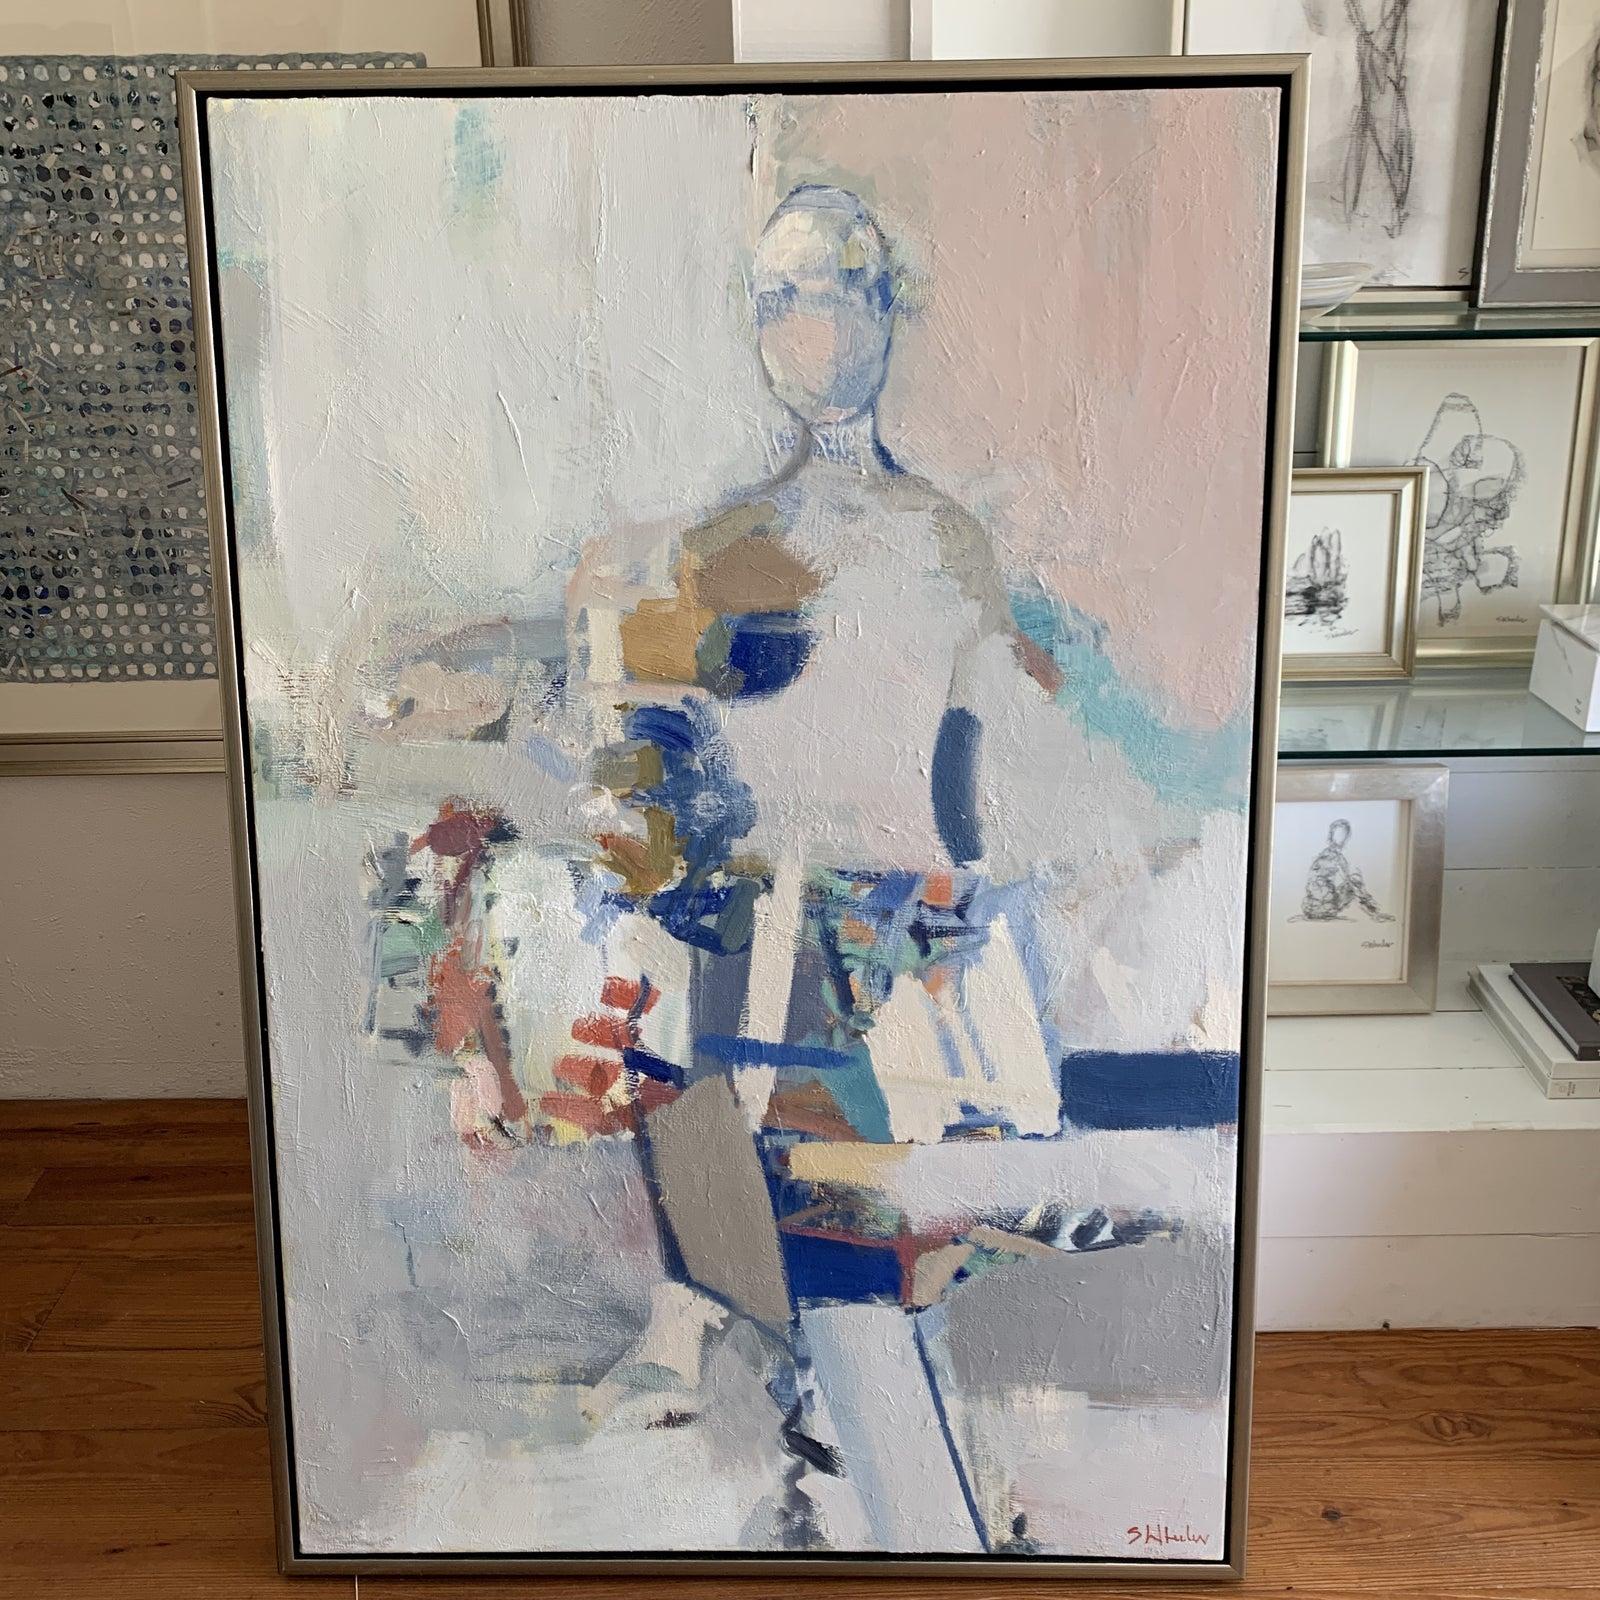 Stephanie Wheeler oil figure. Pale Pink, Blues and greys. Floating in Silver frame. This figurative piece will make a statement in any home! Brings joy & happiness. This painting is part of her show 